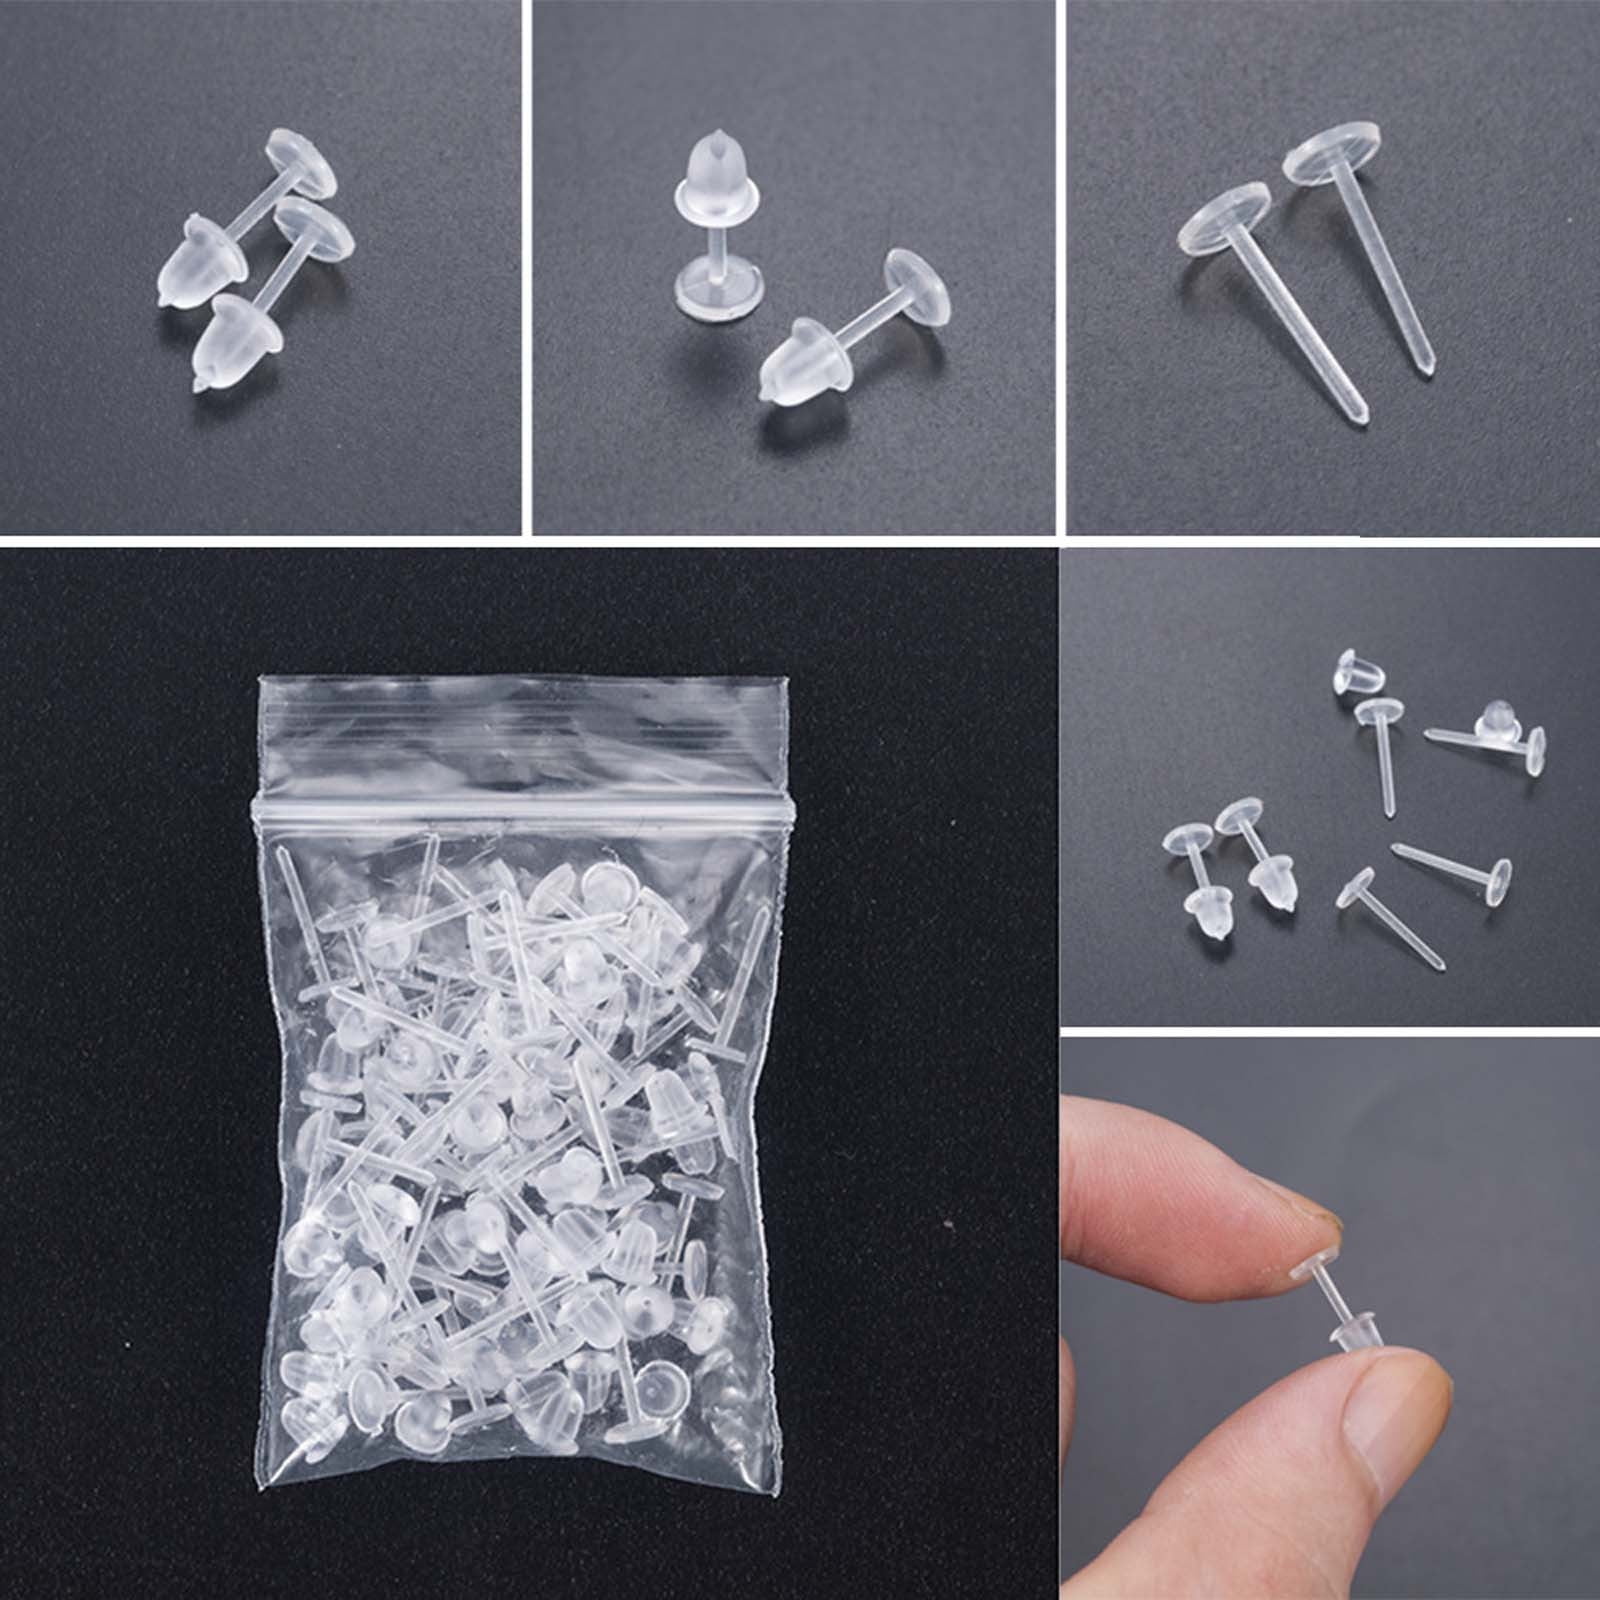 Kiplyki Wholesale 25 Pair Of Plastic Earring Posts And Transparent Earrings  On The Back Of Earrings